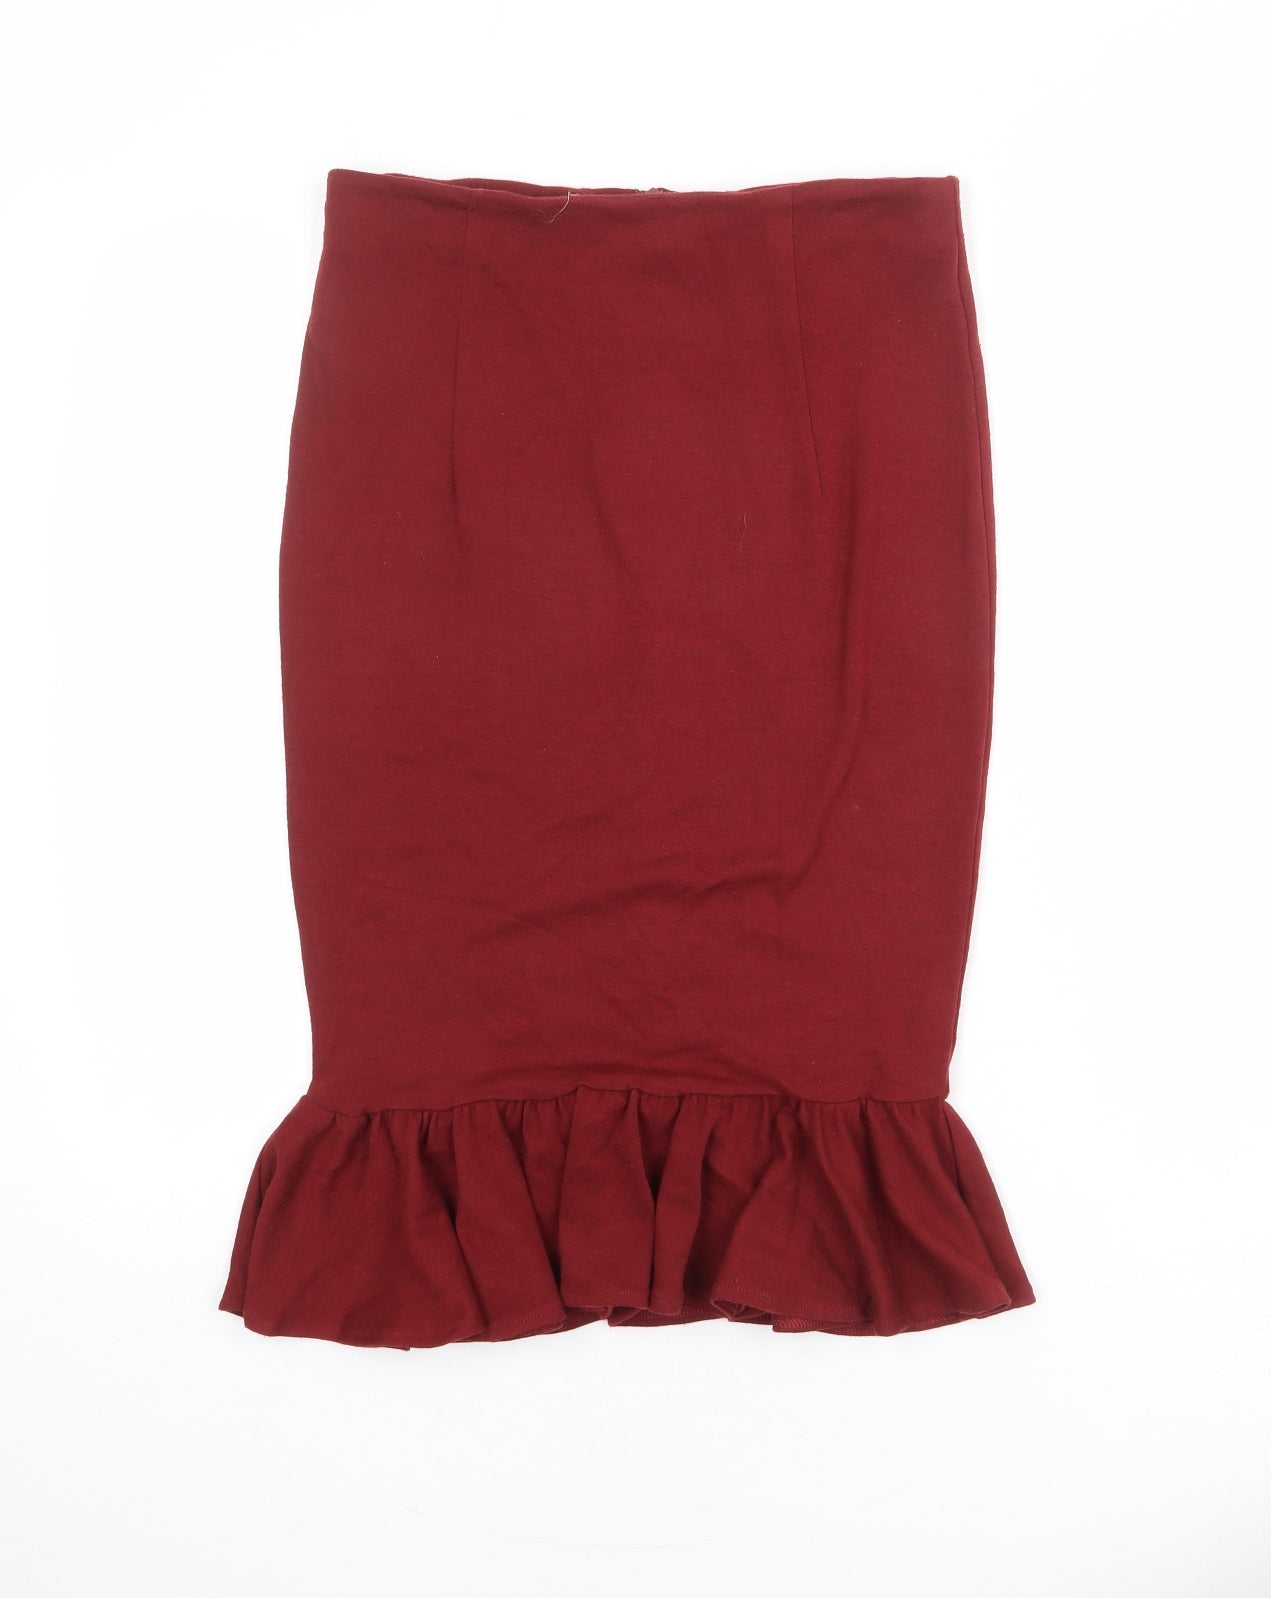 Traffic People Womens Red Polyester Trumpet Skirt Size S Zip